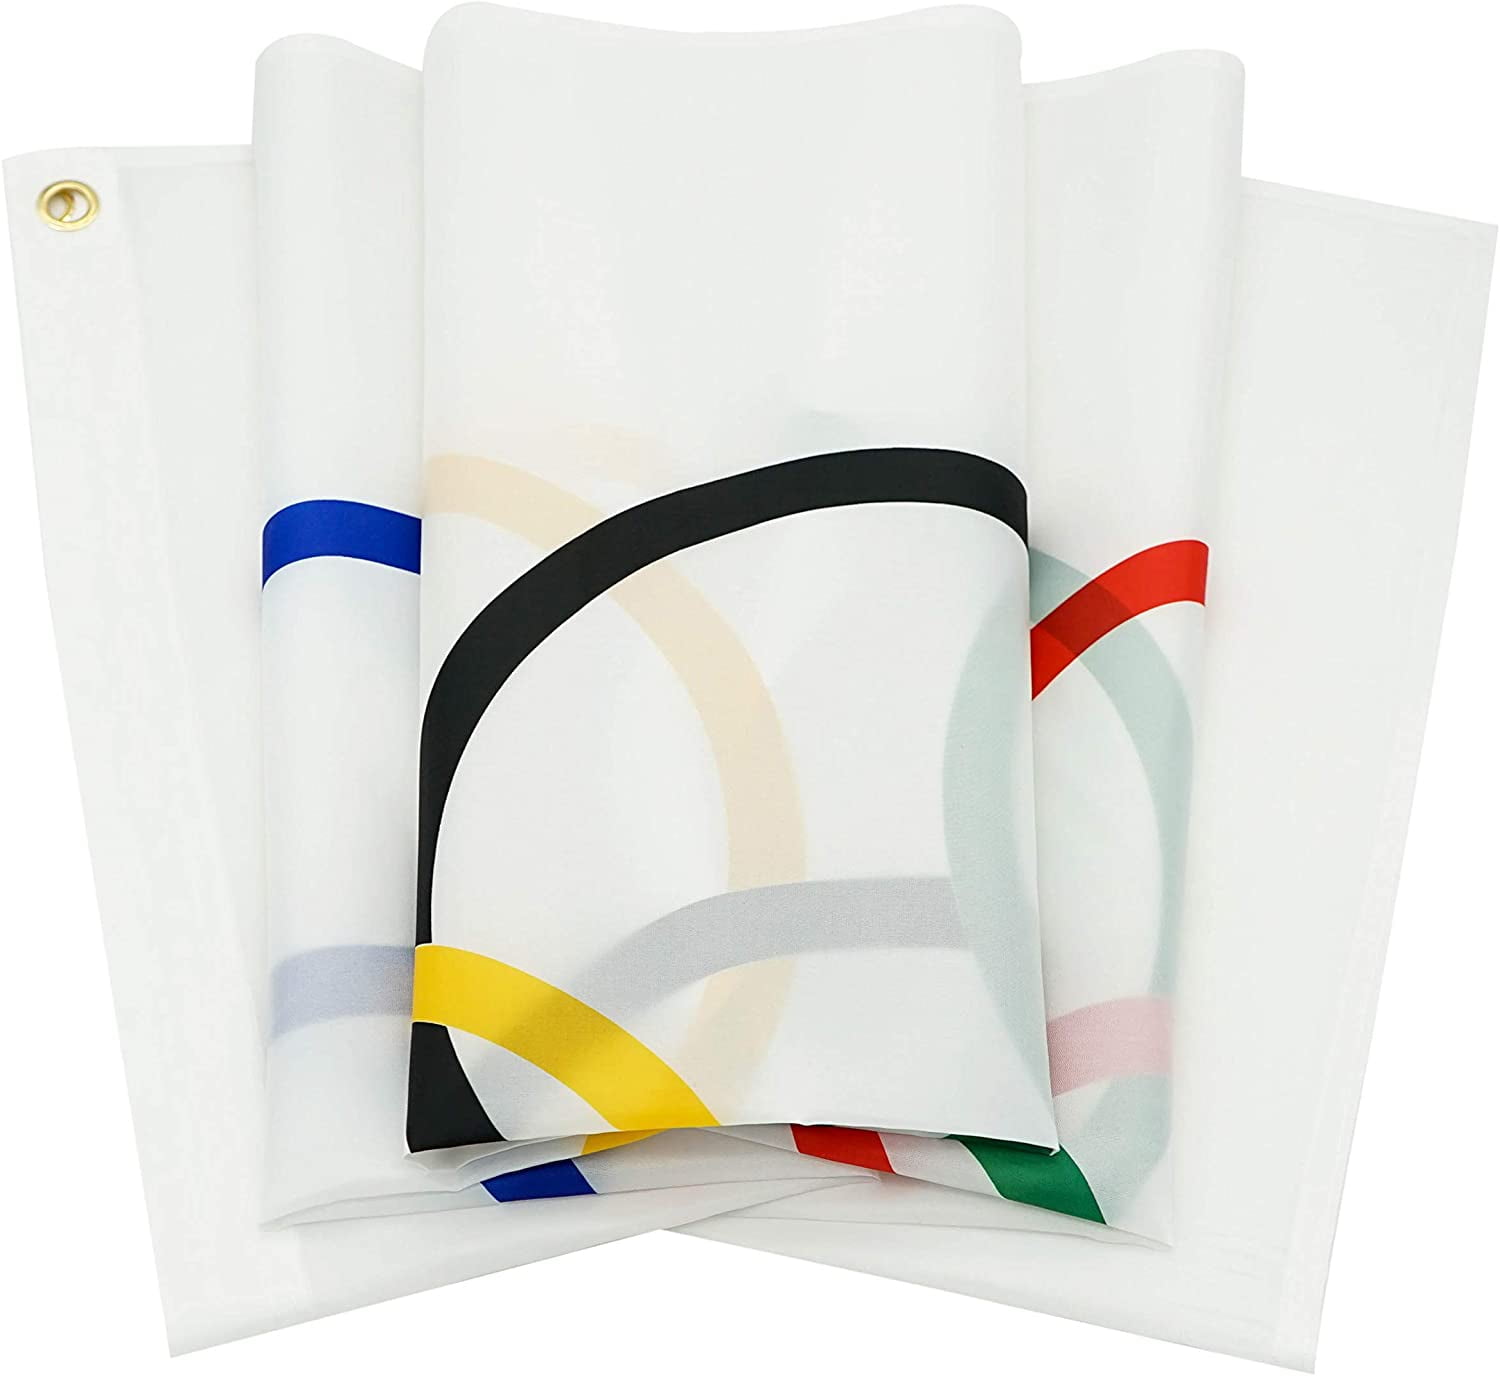 OLYMPIC OLYMPICS GAMES 5-RINGS FLAG 3X5' FT BANNER FLAGS THICK DURABLE POLYESTER 